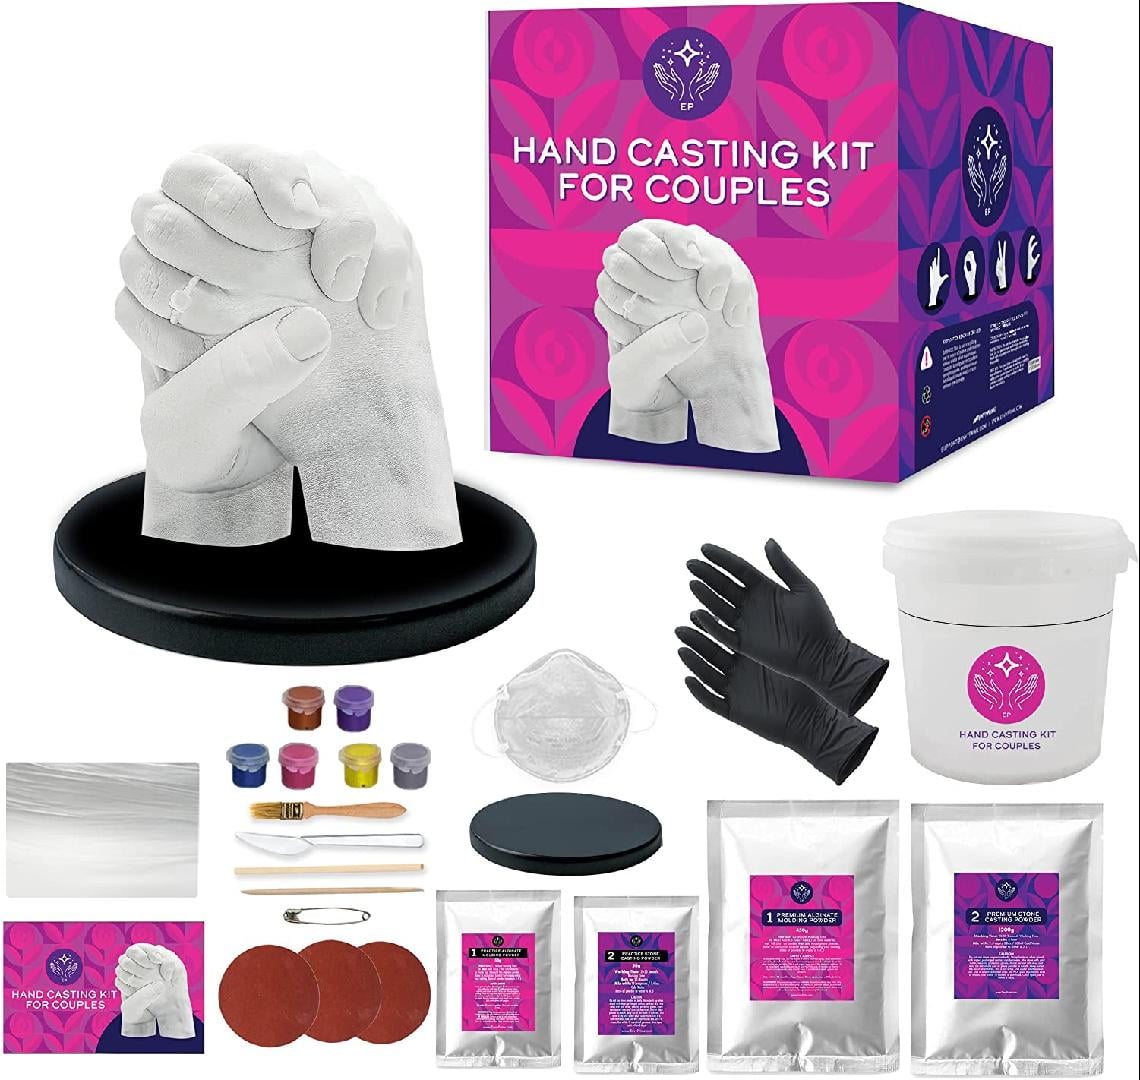 LTDSOAR Hand Casting Kit Couples Gifts with Practice Kit, Hand Mold Kit for  Adults & Kids, Romantic Anniversary Wedding Birthday Gifts for Her or